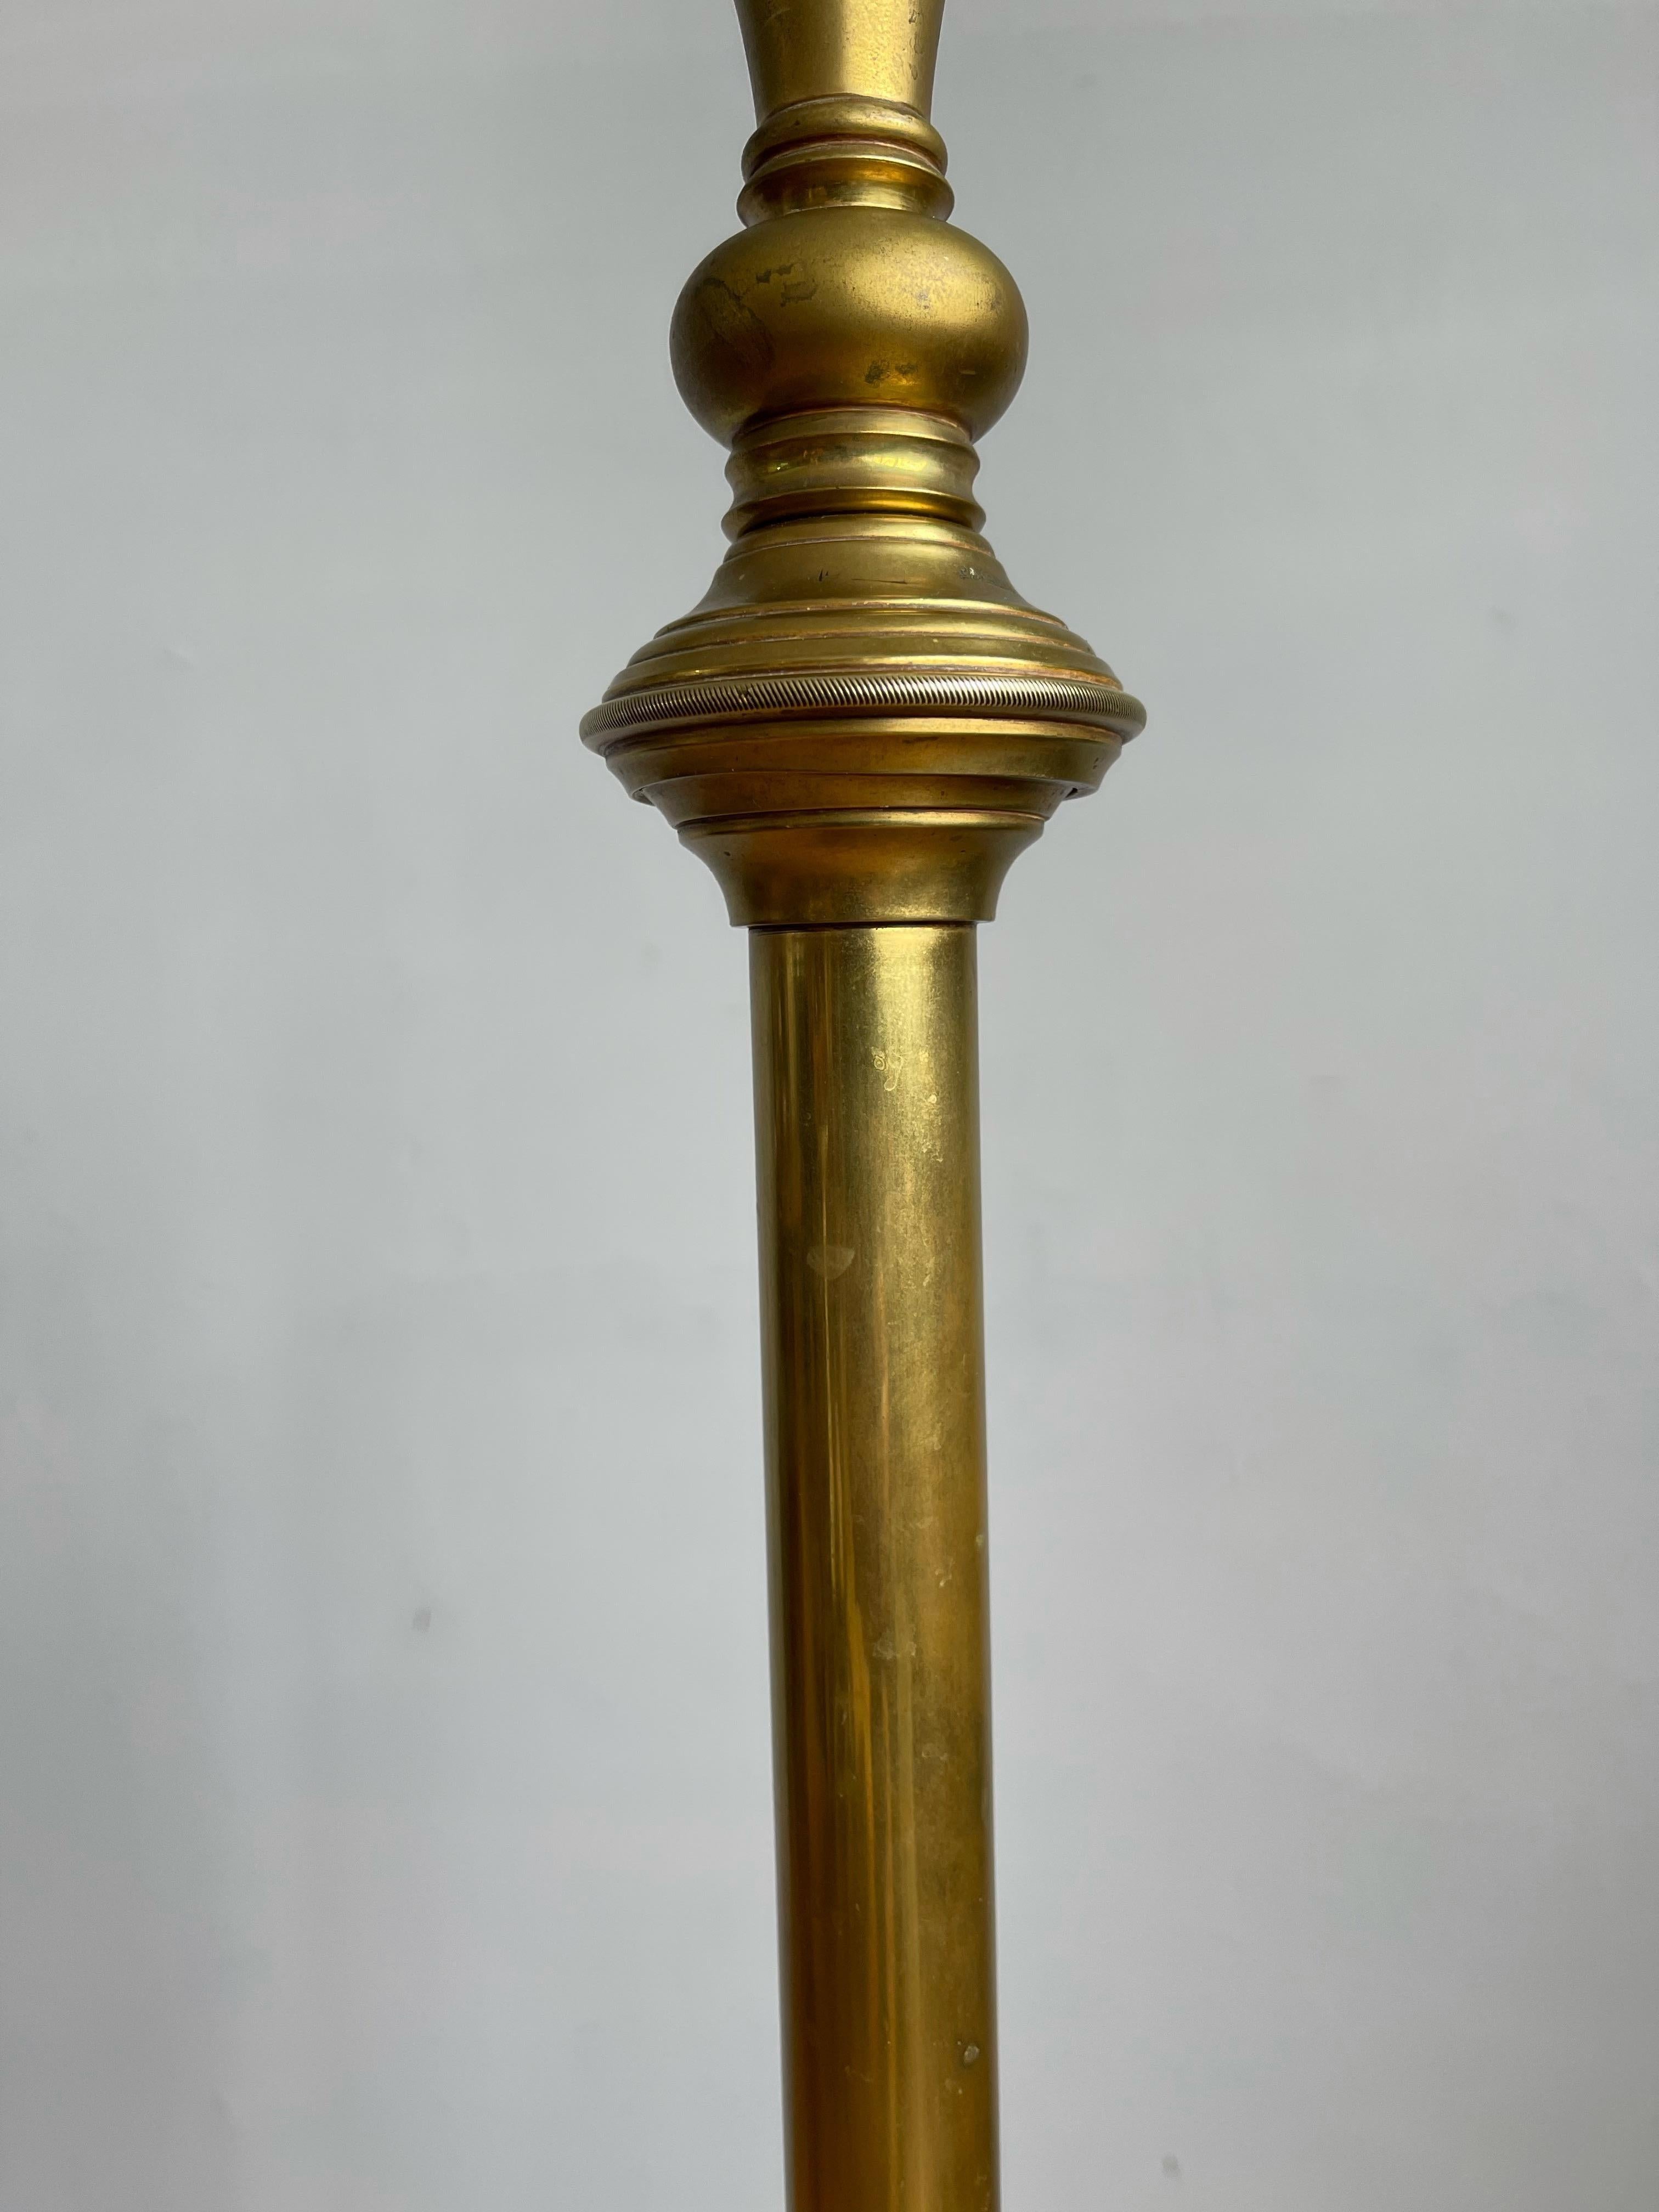 W.A.S. Benson, Antique and Stylish Arts & Crafts Floor Lamp in Bronze circa 1880 For Sale 12